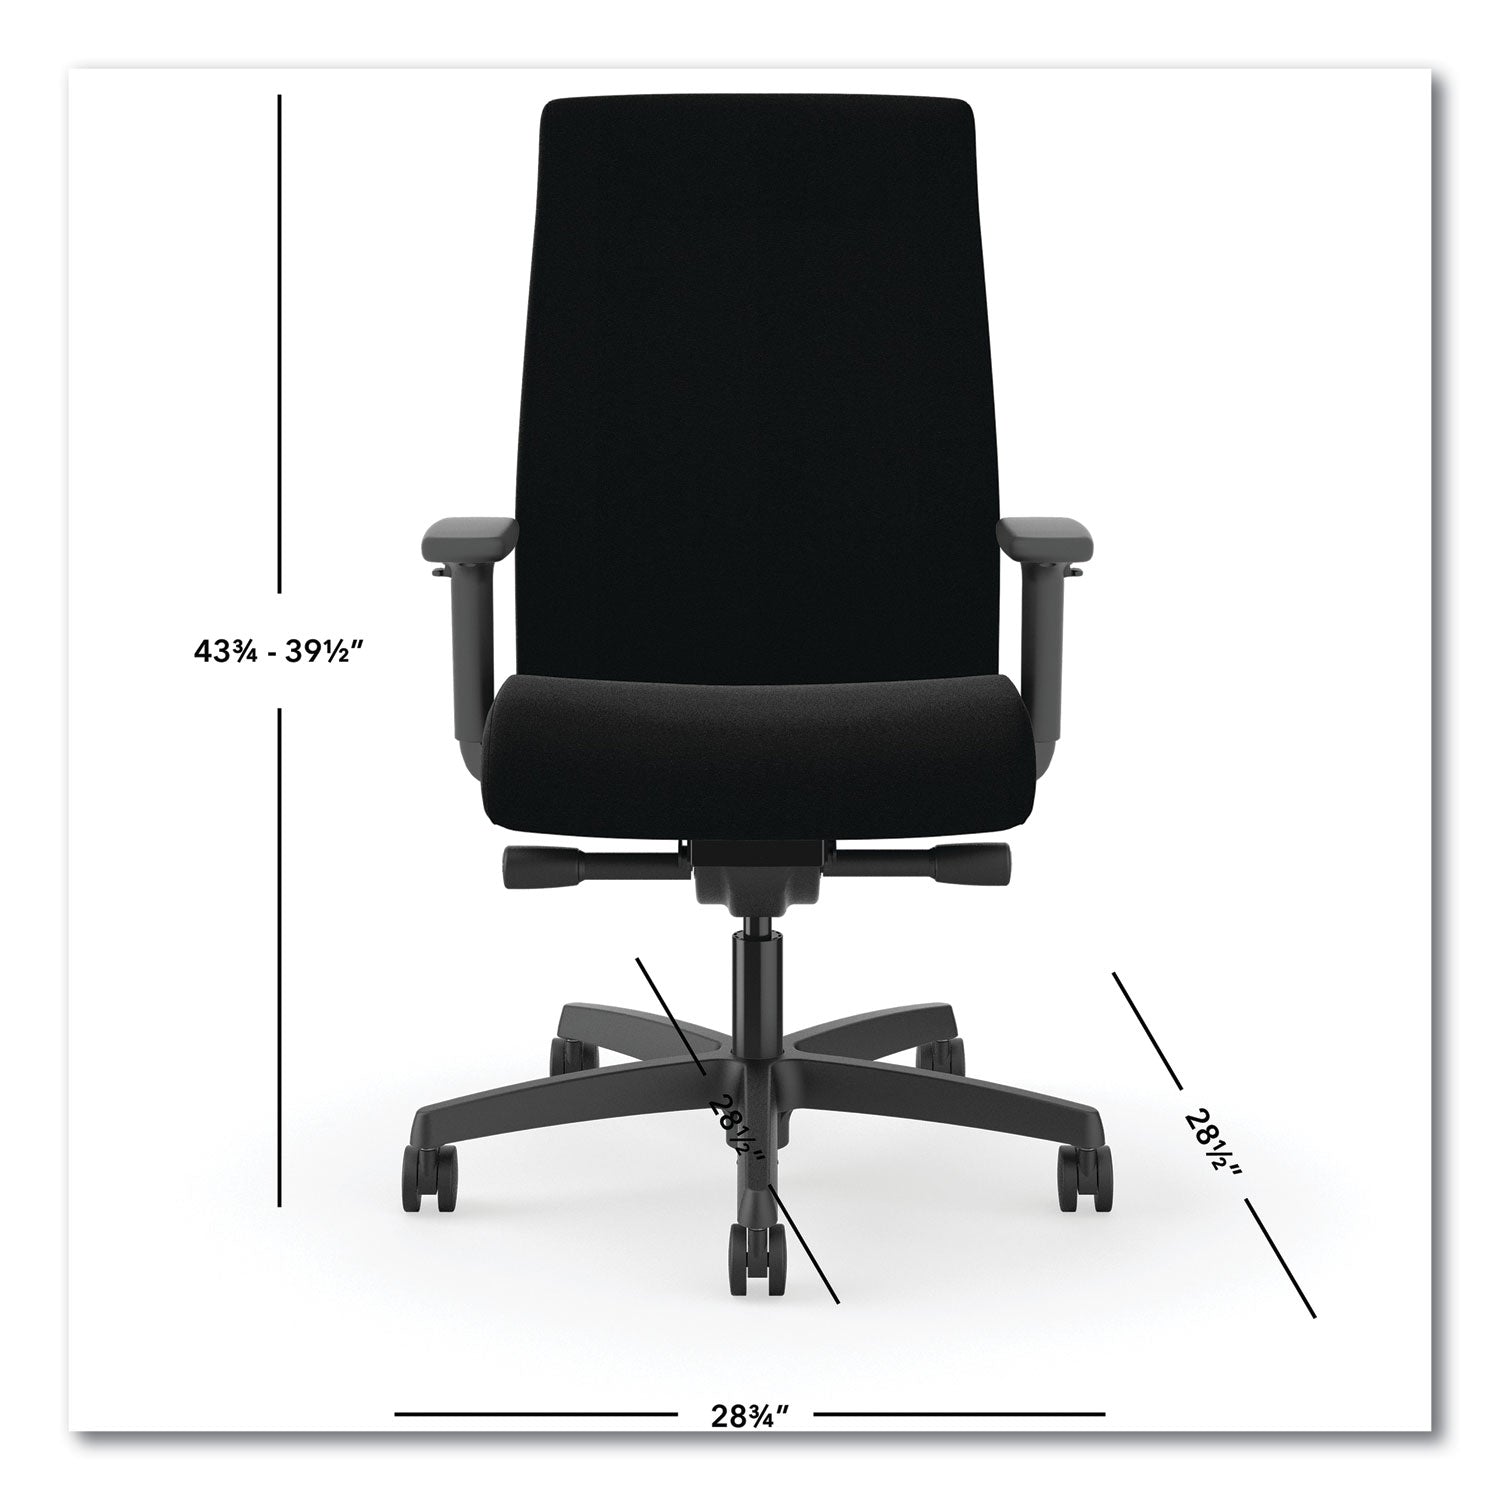 ignition-20-upholstered-mid-back-task-chair-17-to-215-seat-height-black-fabric-seat-back-ships-in-7-10-business-days_honi2u2ahcu10tk - 4